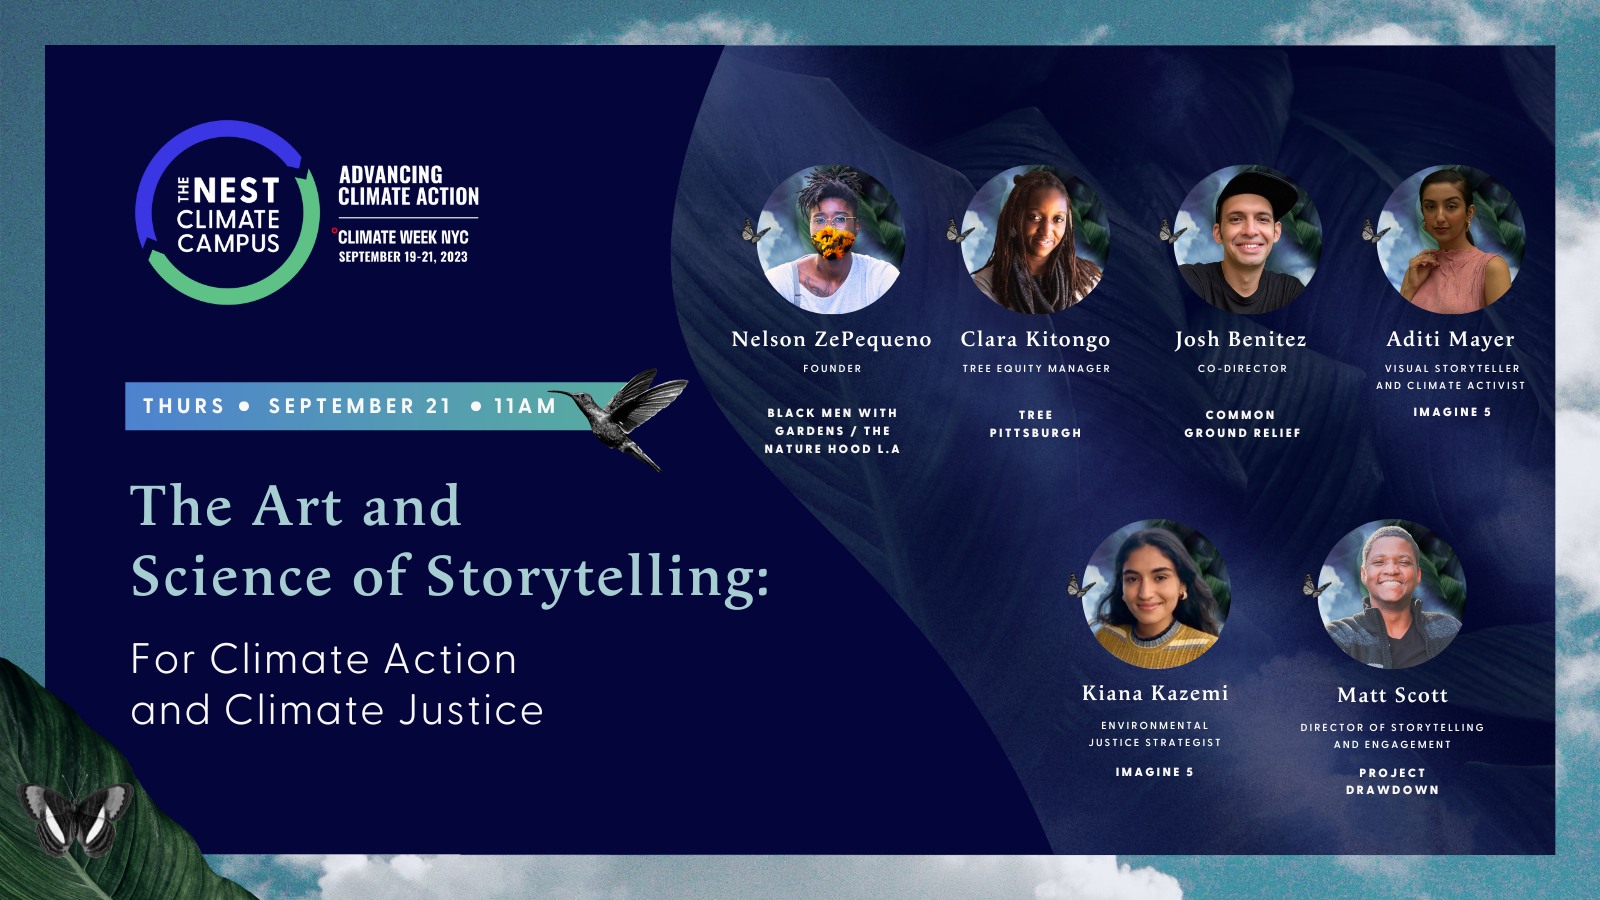 A poster for The Art and Science of Storytelling for Climate Action and Climate Justice event